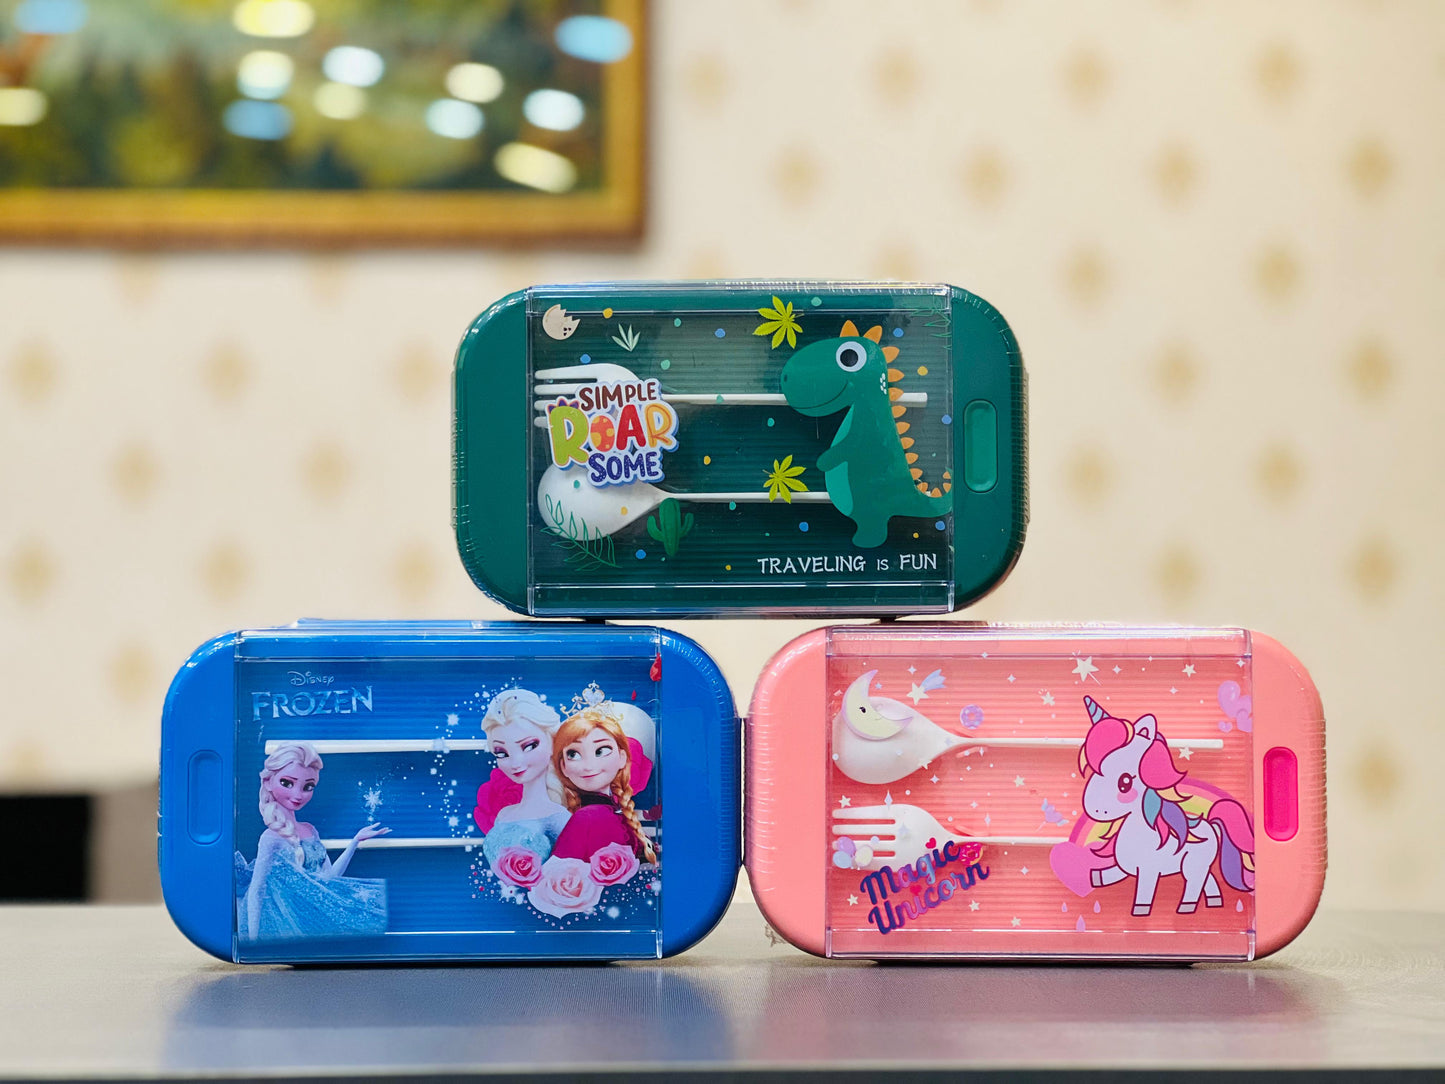 Character Lunch Box